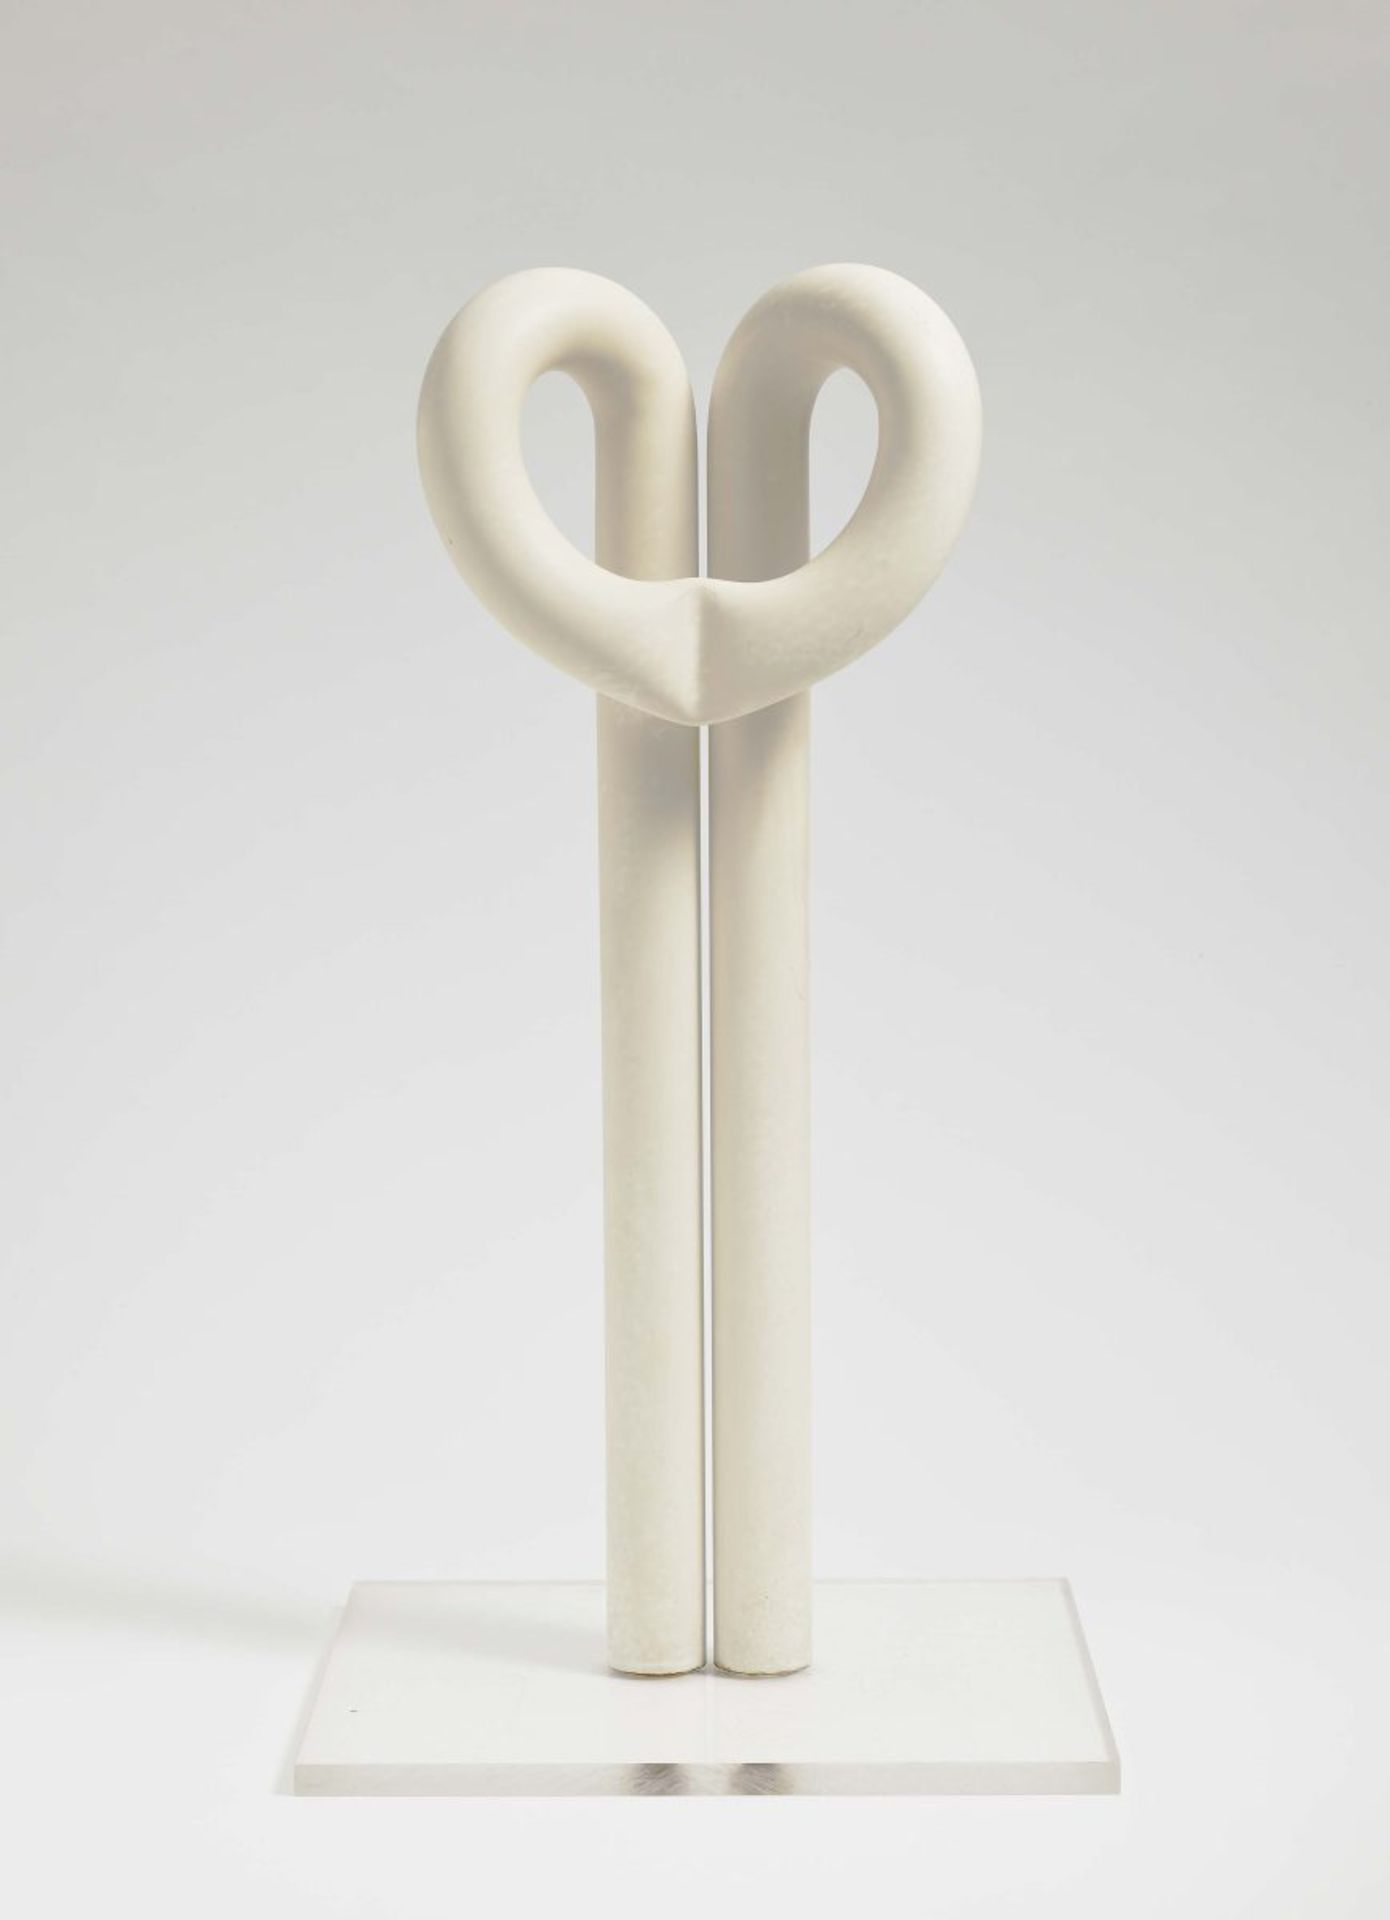 Lechner, AlfEntwined Heart. 1968/1970 Steel-walled tubes, polyester coated Plexiglas plate 45 cm